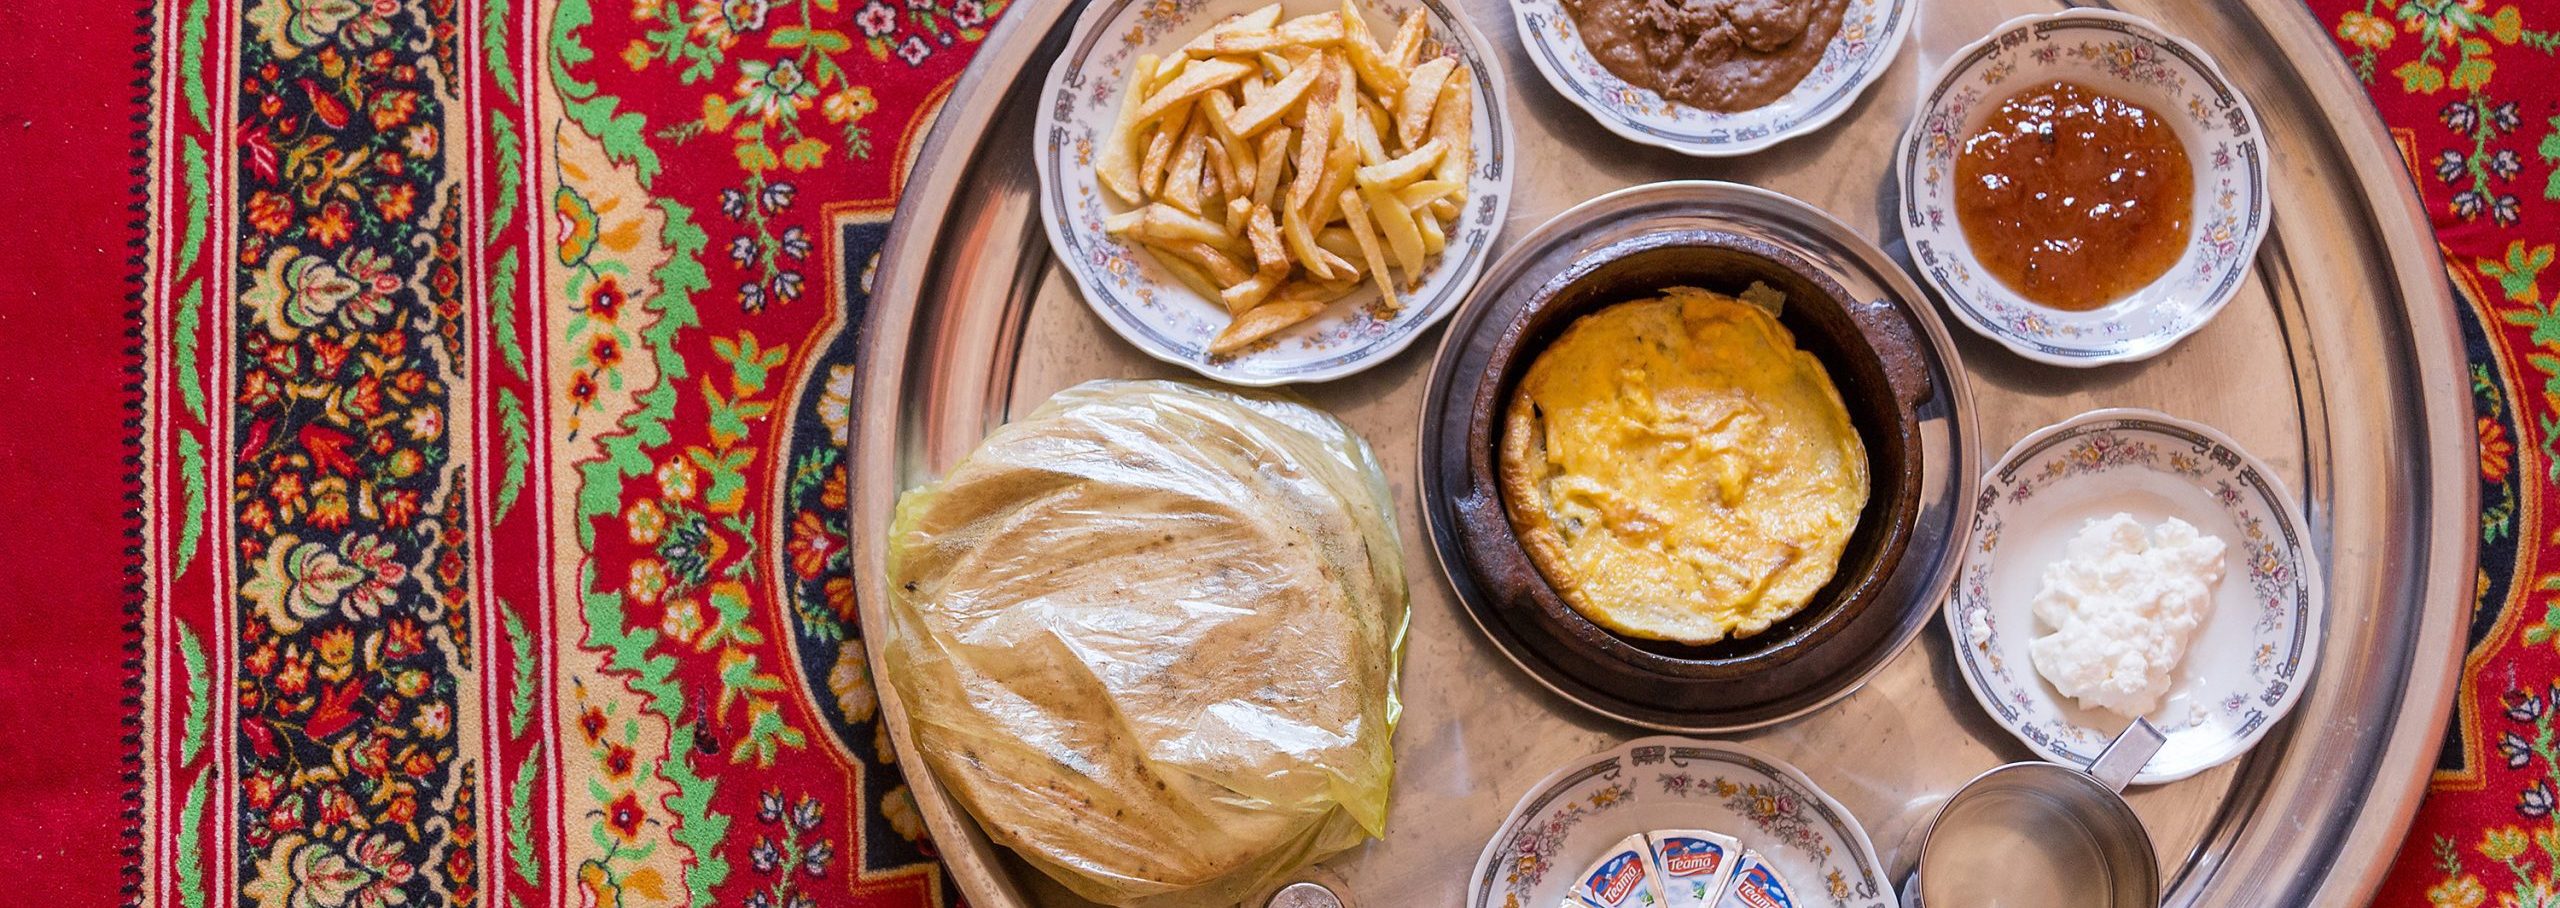 10 Tasty Egyptian Dishes You Need To Try